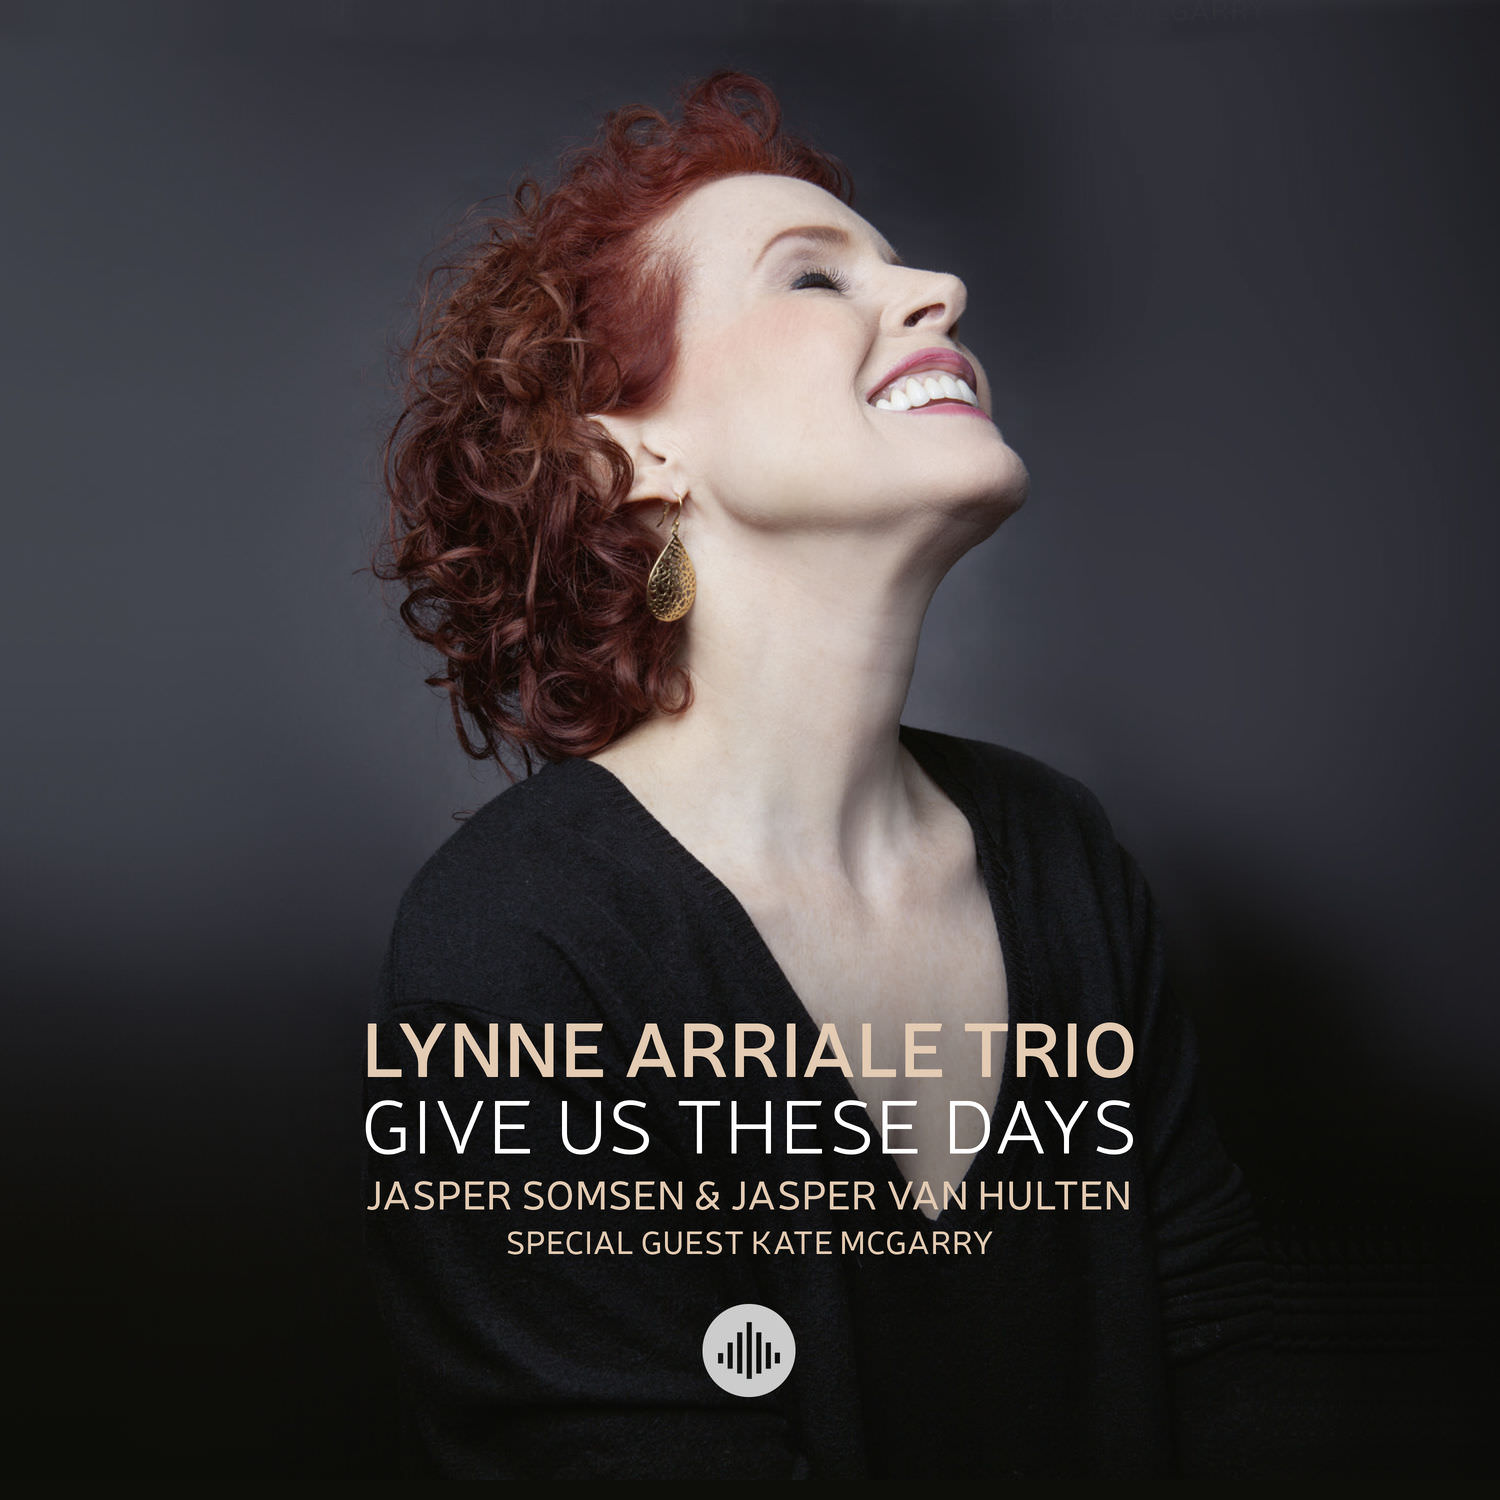 Lynne Arriale Trio - Give Us These Days (2018) [FLAC 24bit/48kHz]